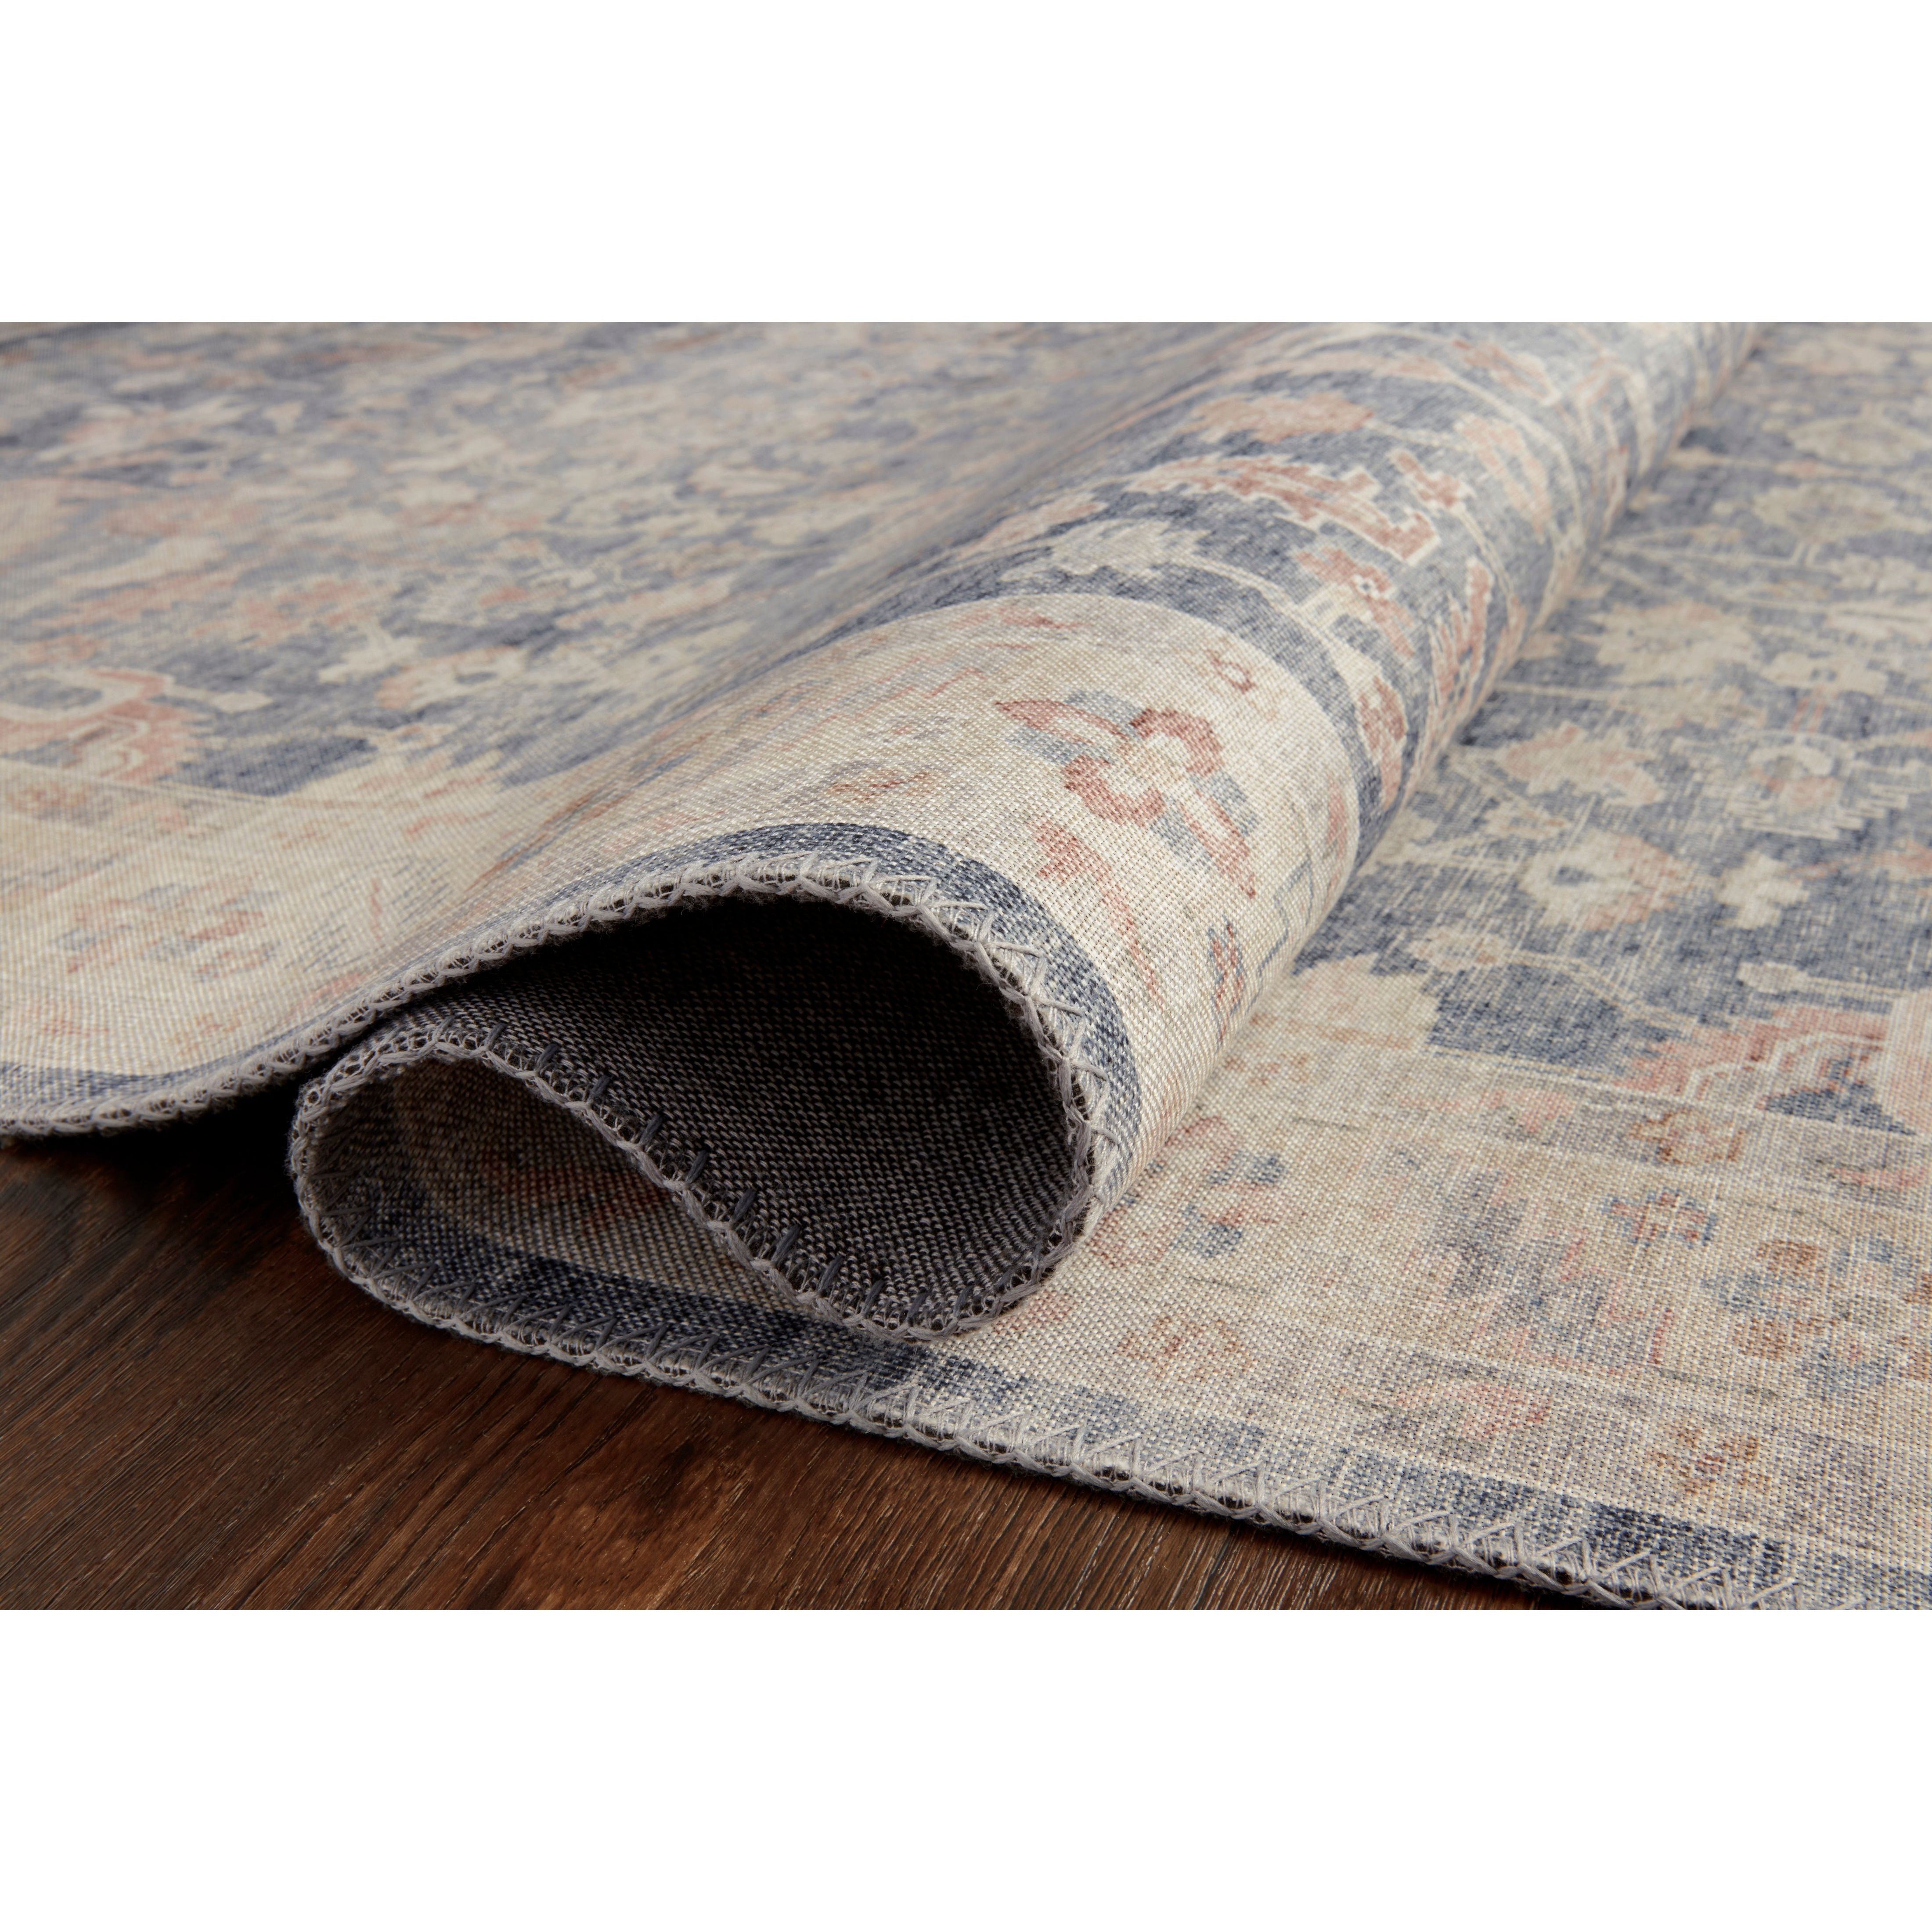 Featuring soft motifs in a carefully curated color palate of blue, yellow, red, and hints of orange, the Hathaway Denim / Multi area rug captures the essence of one-of-a-kind vintage or antique area rug at an attractive price.